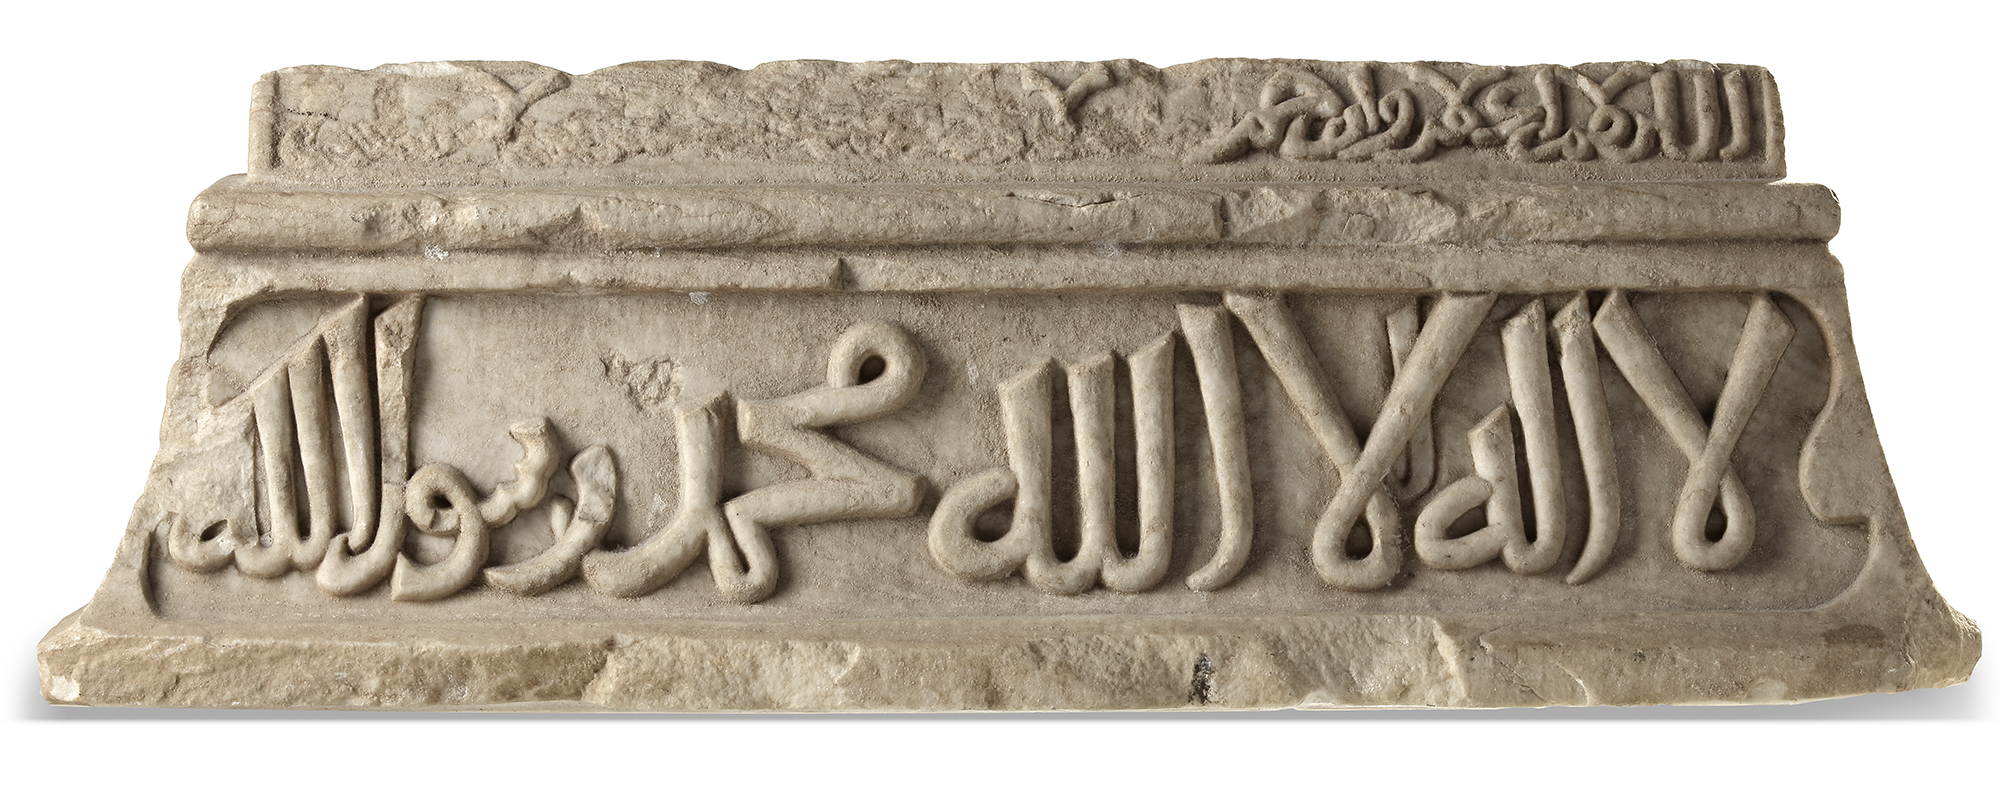 A GHAZNAVID MARBLE FUNERARY FRAGMENT, DATED 597 AH/1200 AD - Image 7 of 8